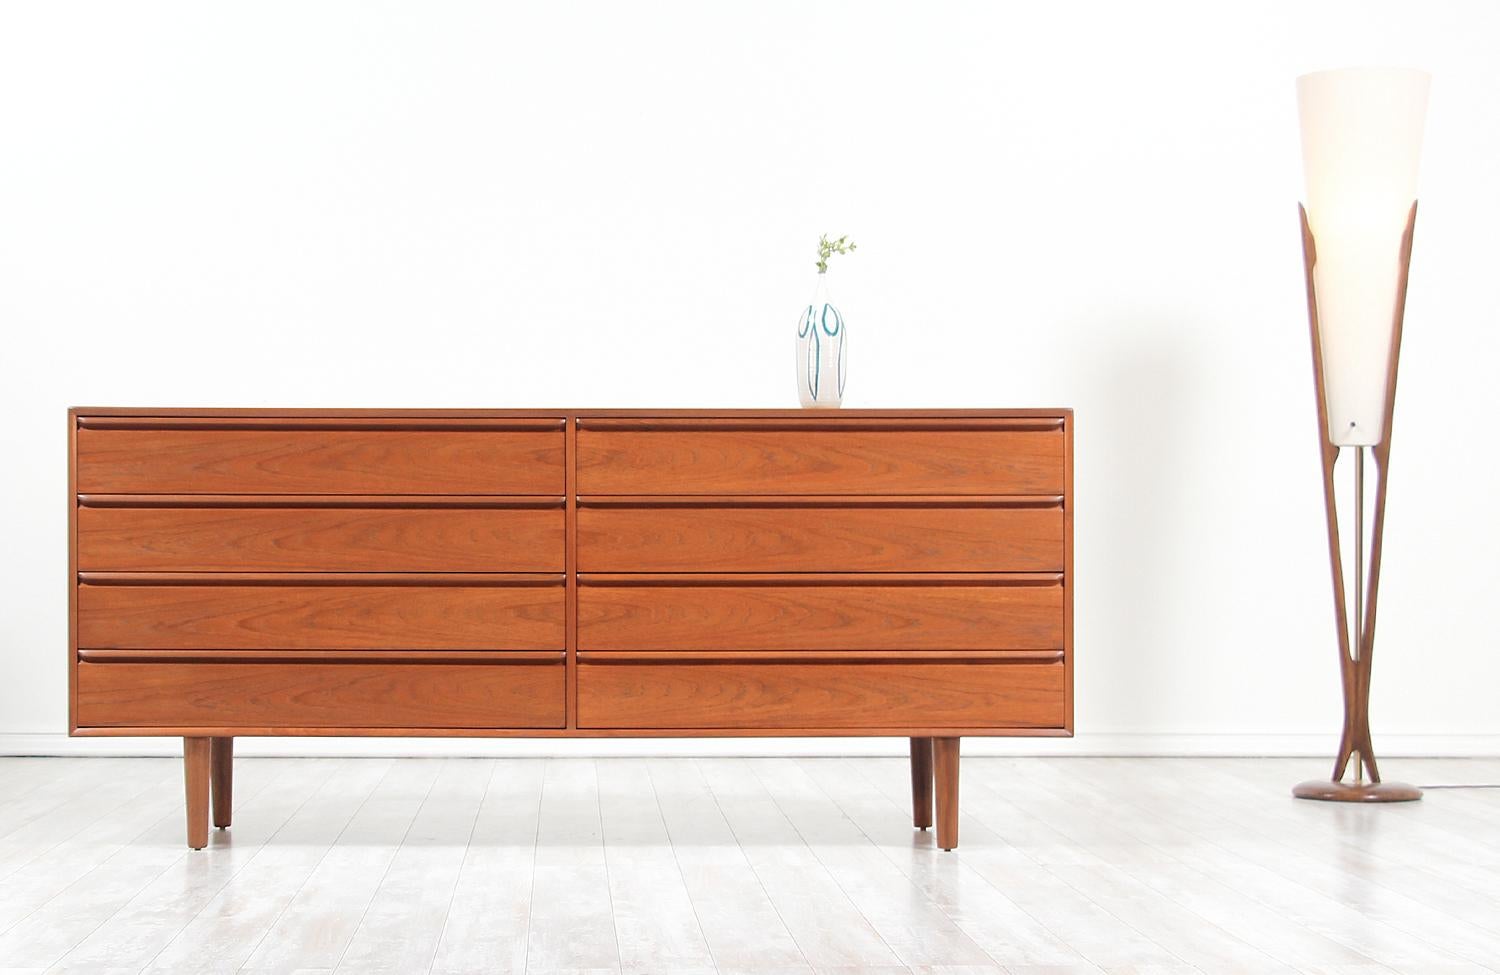 Spacious dresser designed and manufactured by Westnofa Furniture in Norway, circa 1960s. This Classic Norwegian modern design features a teak wood frame with eight dovetailed drawers, each accented with Westnofa’s signature sculpted pulls. The case